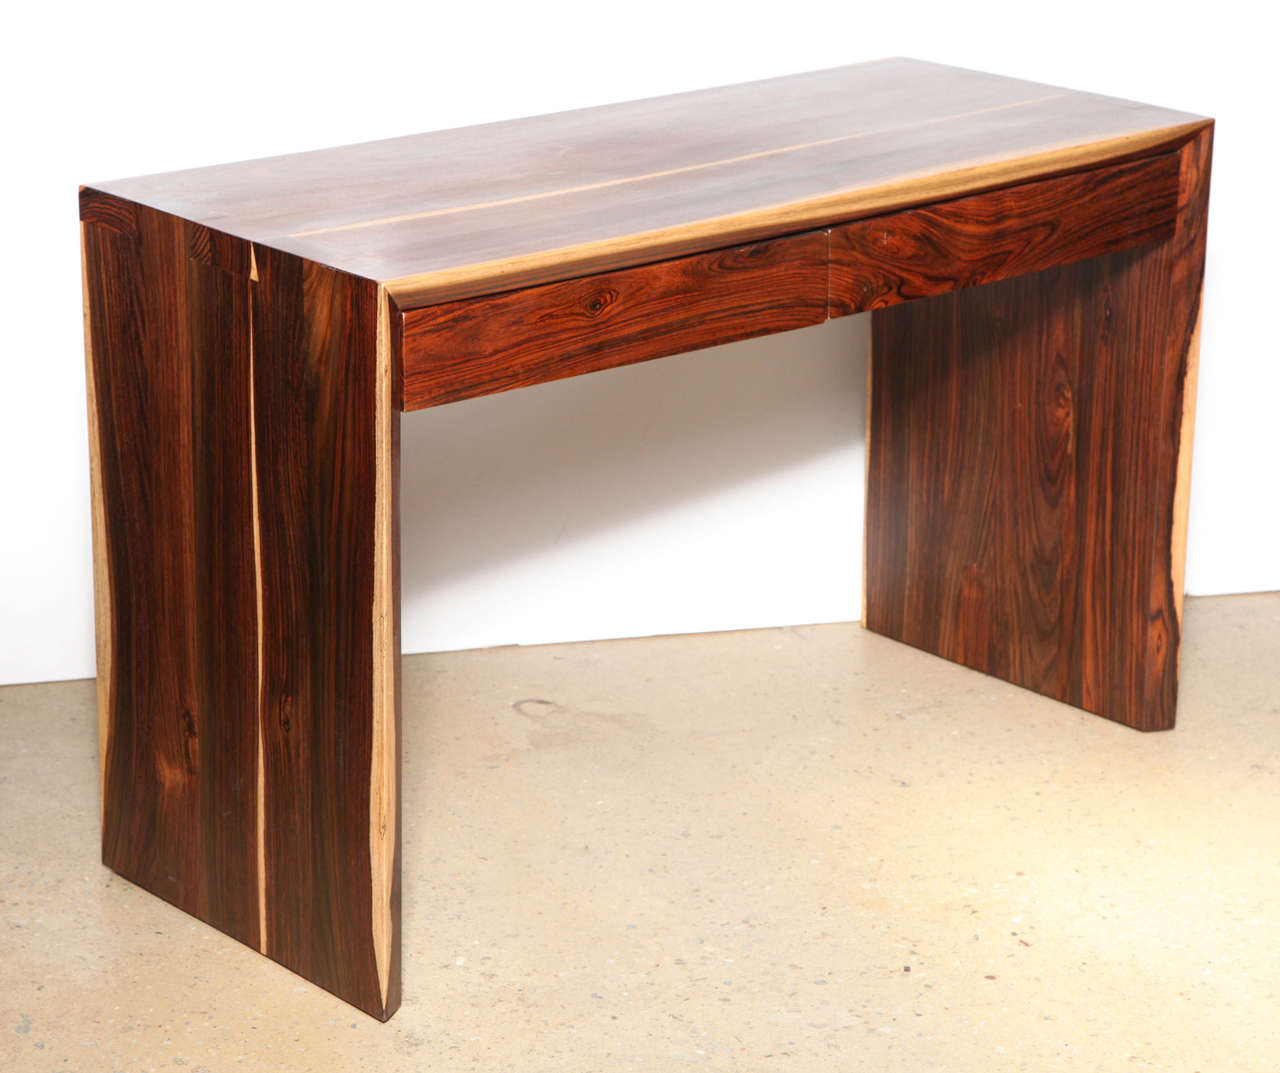 1980's Modern Parsons style 2 drawer Cocobolo Desk. Uniquely crafted Studio piece with 45 degree front, featuring Light to Dark deeply grained Mexican Cocobolo Wood, dado joints and two side by side drawers.  24.75